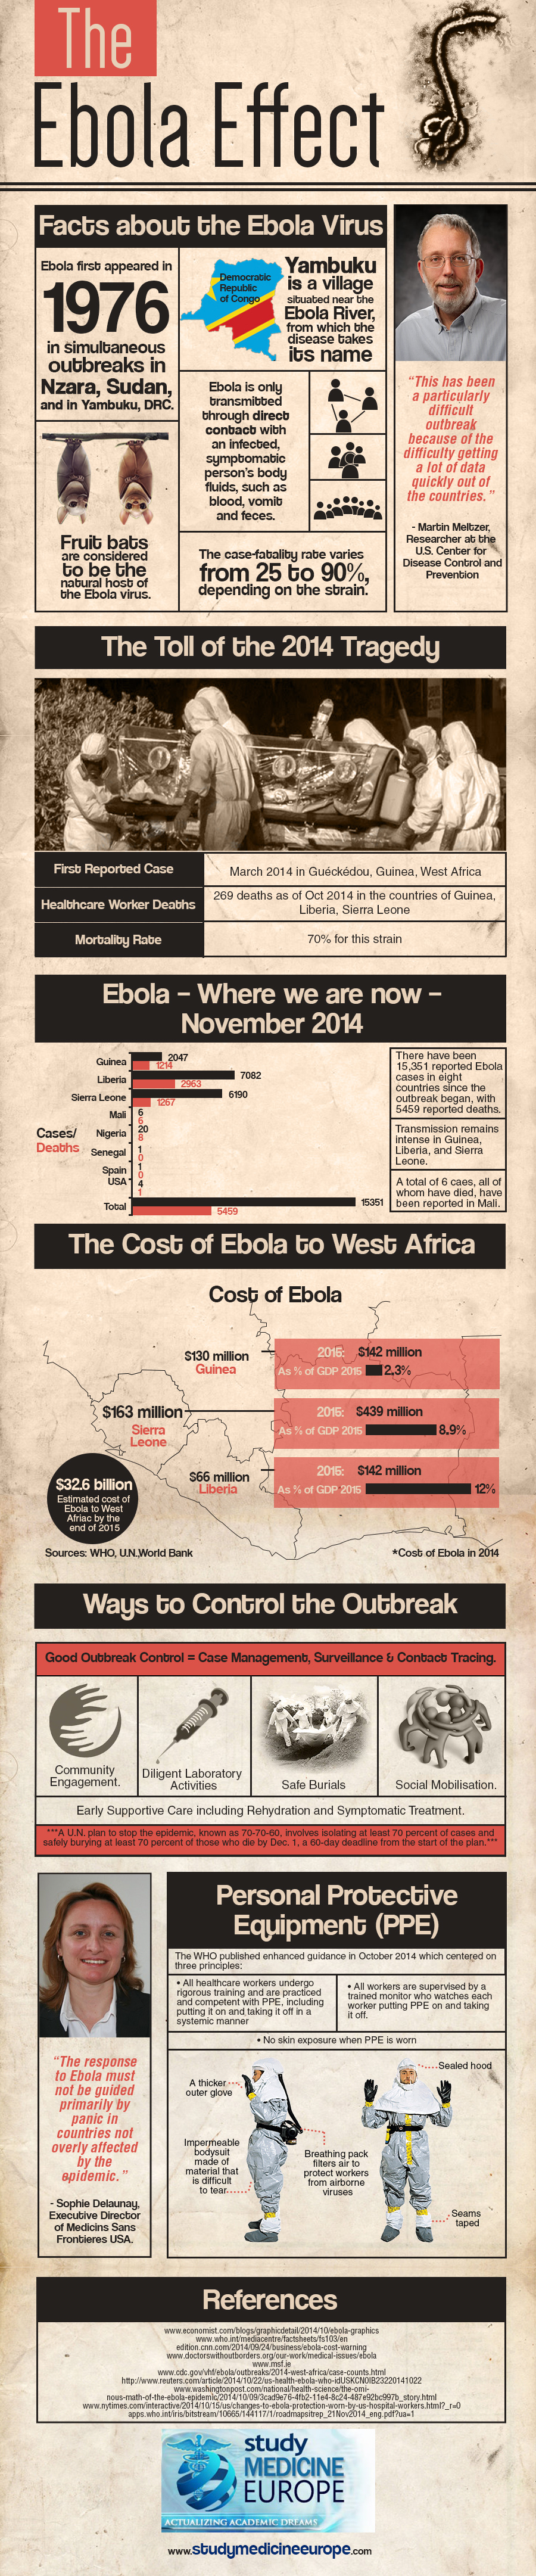 Ebola-Effect-Infographic